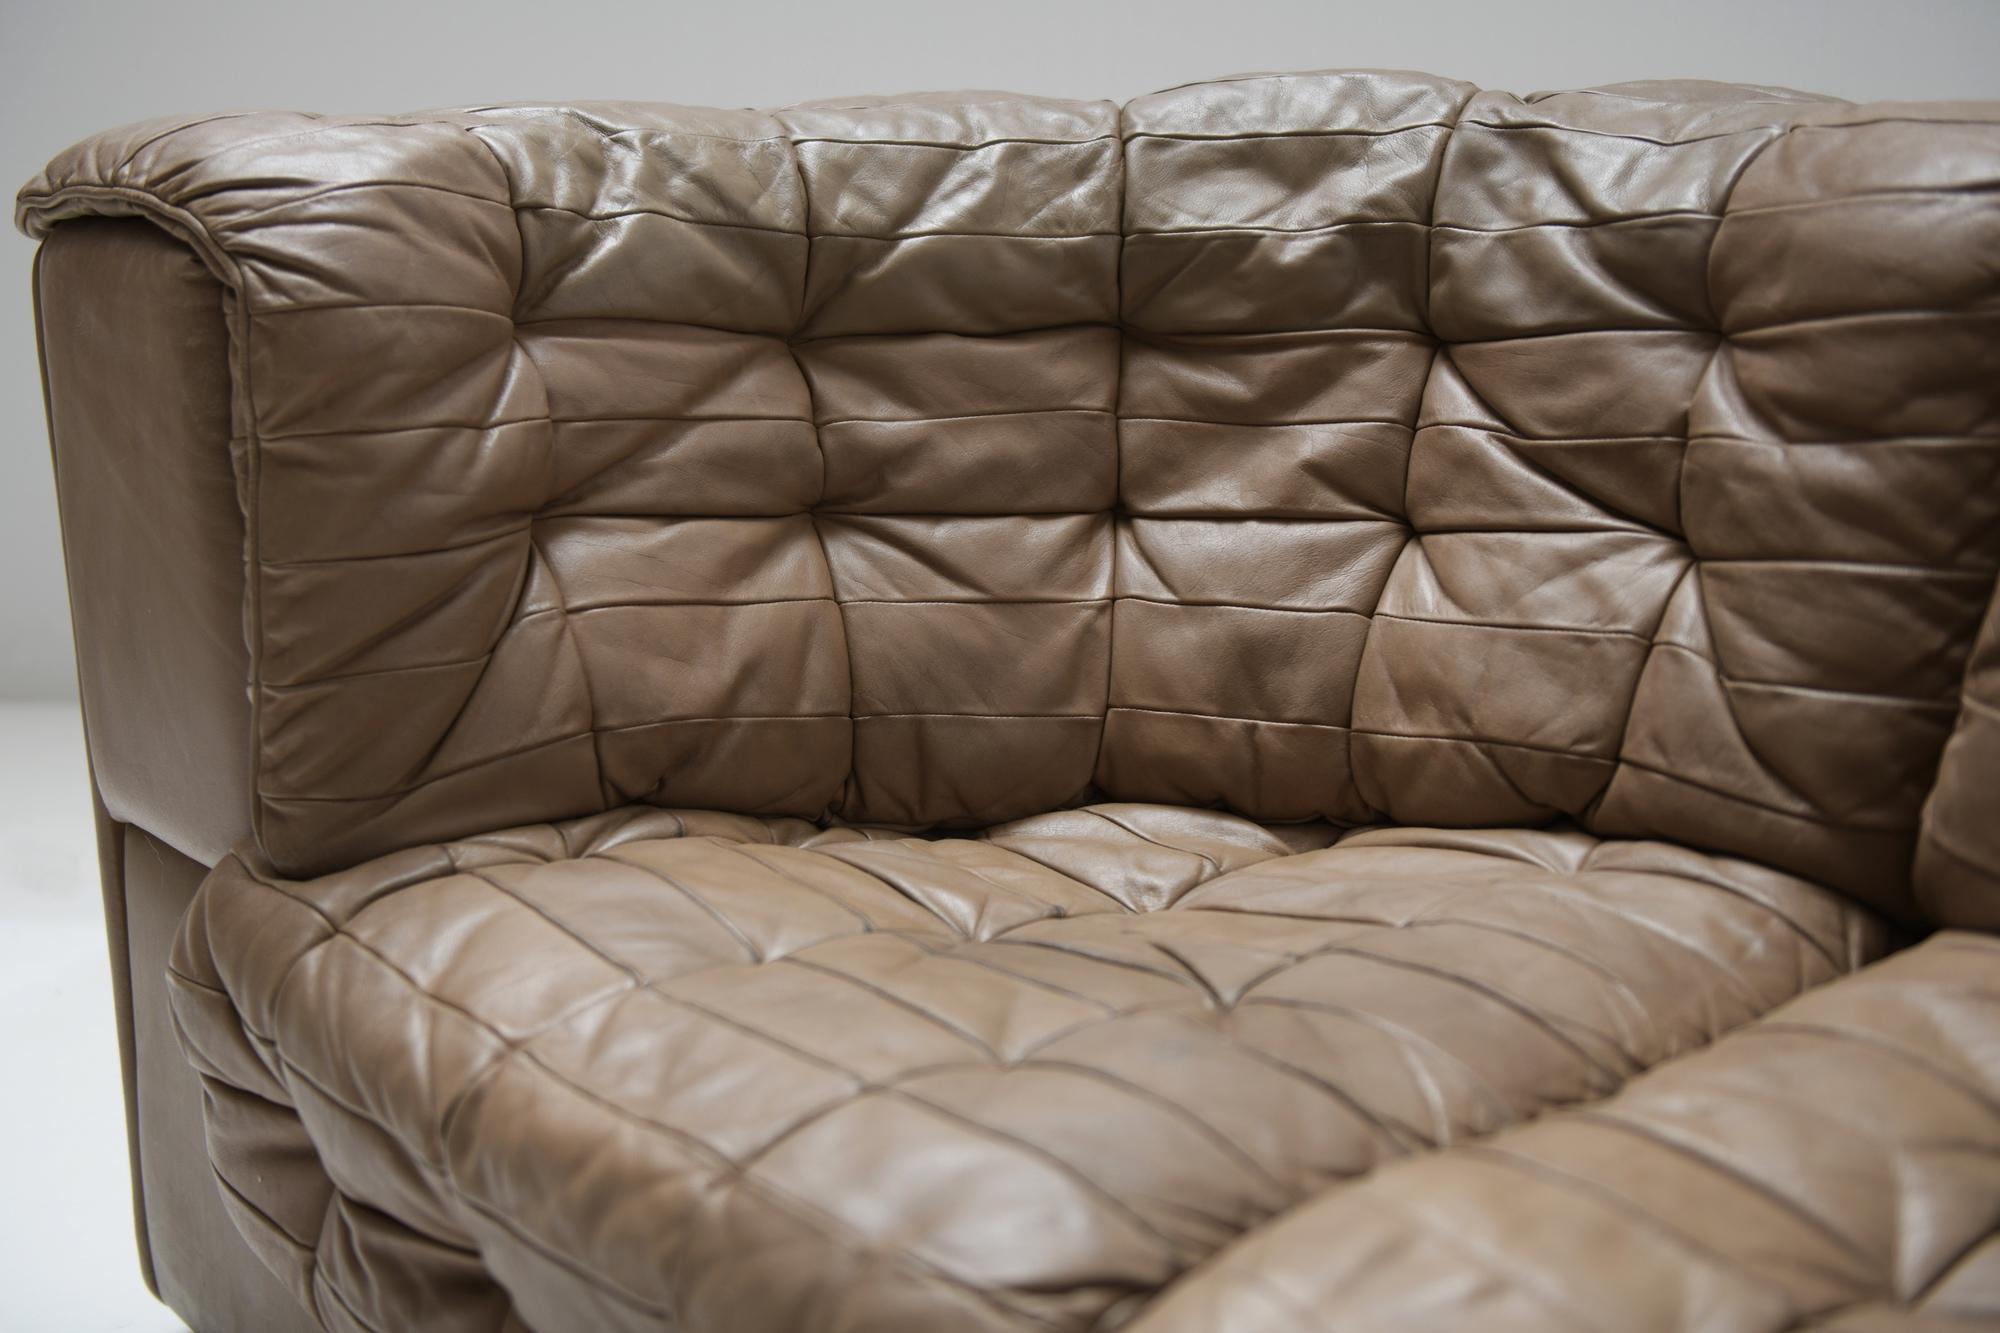 Ds 11 Modular Sofa in Brown Patchwork Leather by De Sede Team for De Sede Swiss For Sale 5